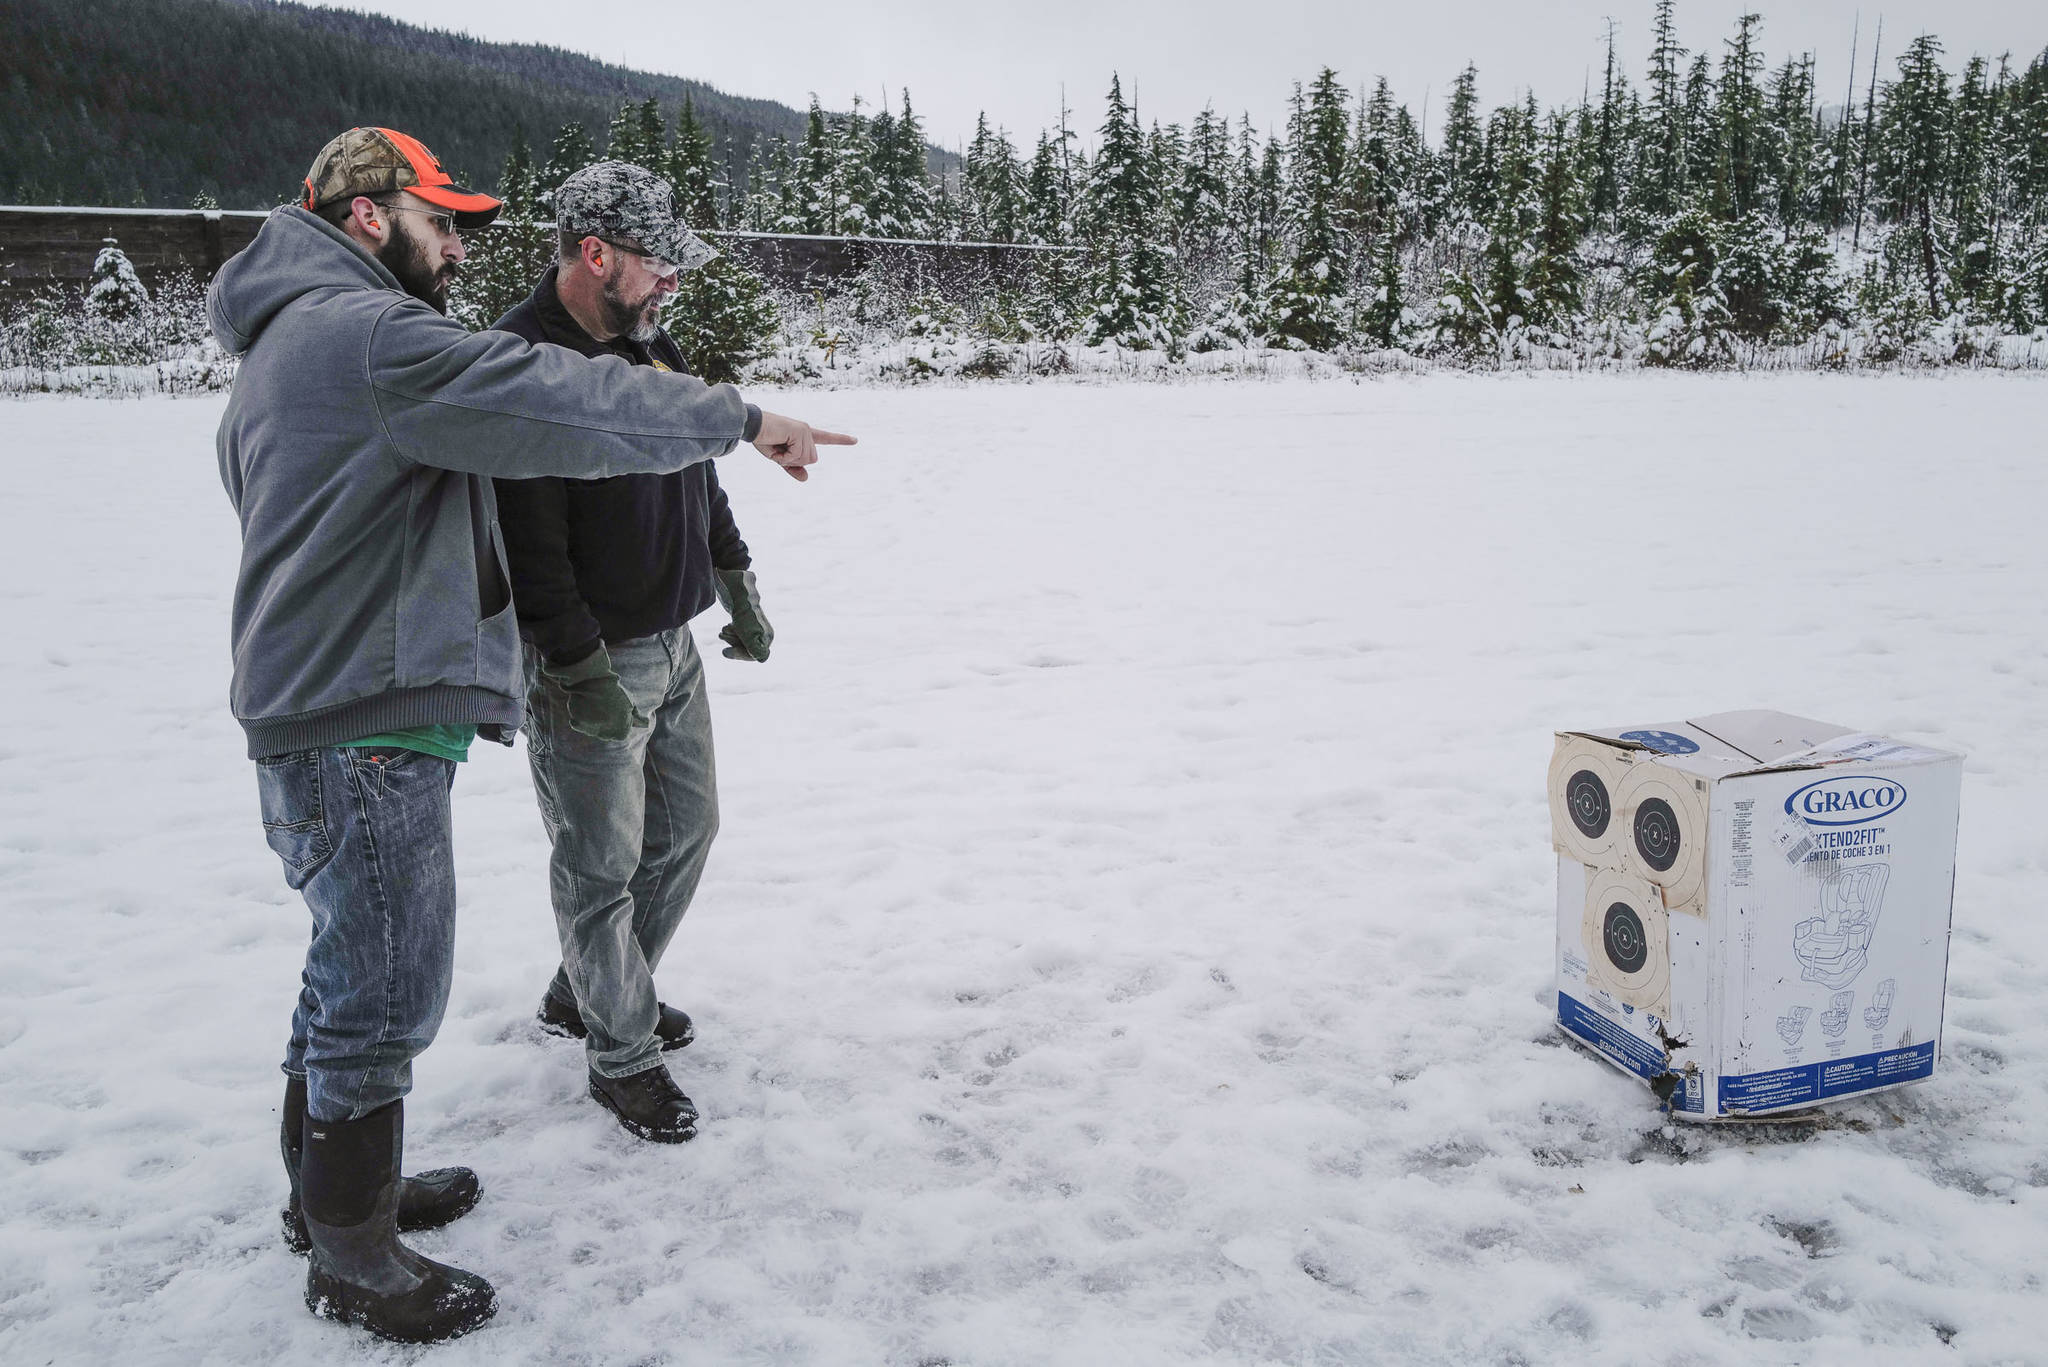 Tim Storbeck Sr., right, and his son, Tim, check on their target while taking target practice at the Hank Harmon Rifle Range on Montana Creek Road on Wednesday, Dec. 18, 2019. (Michael Penn | Juneau Empire)